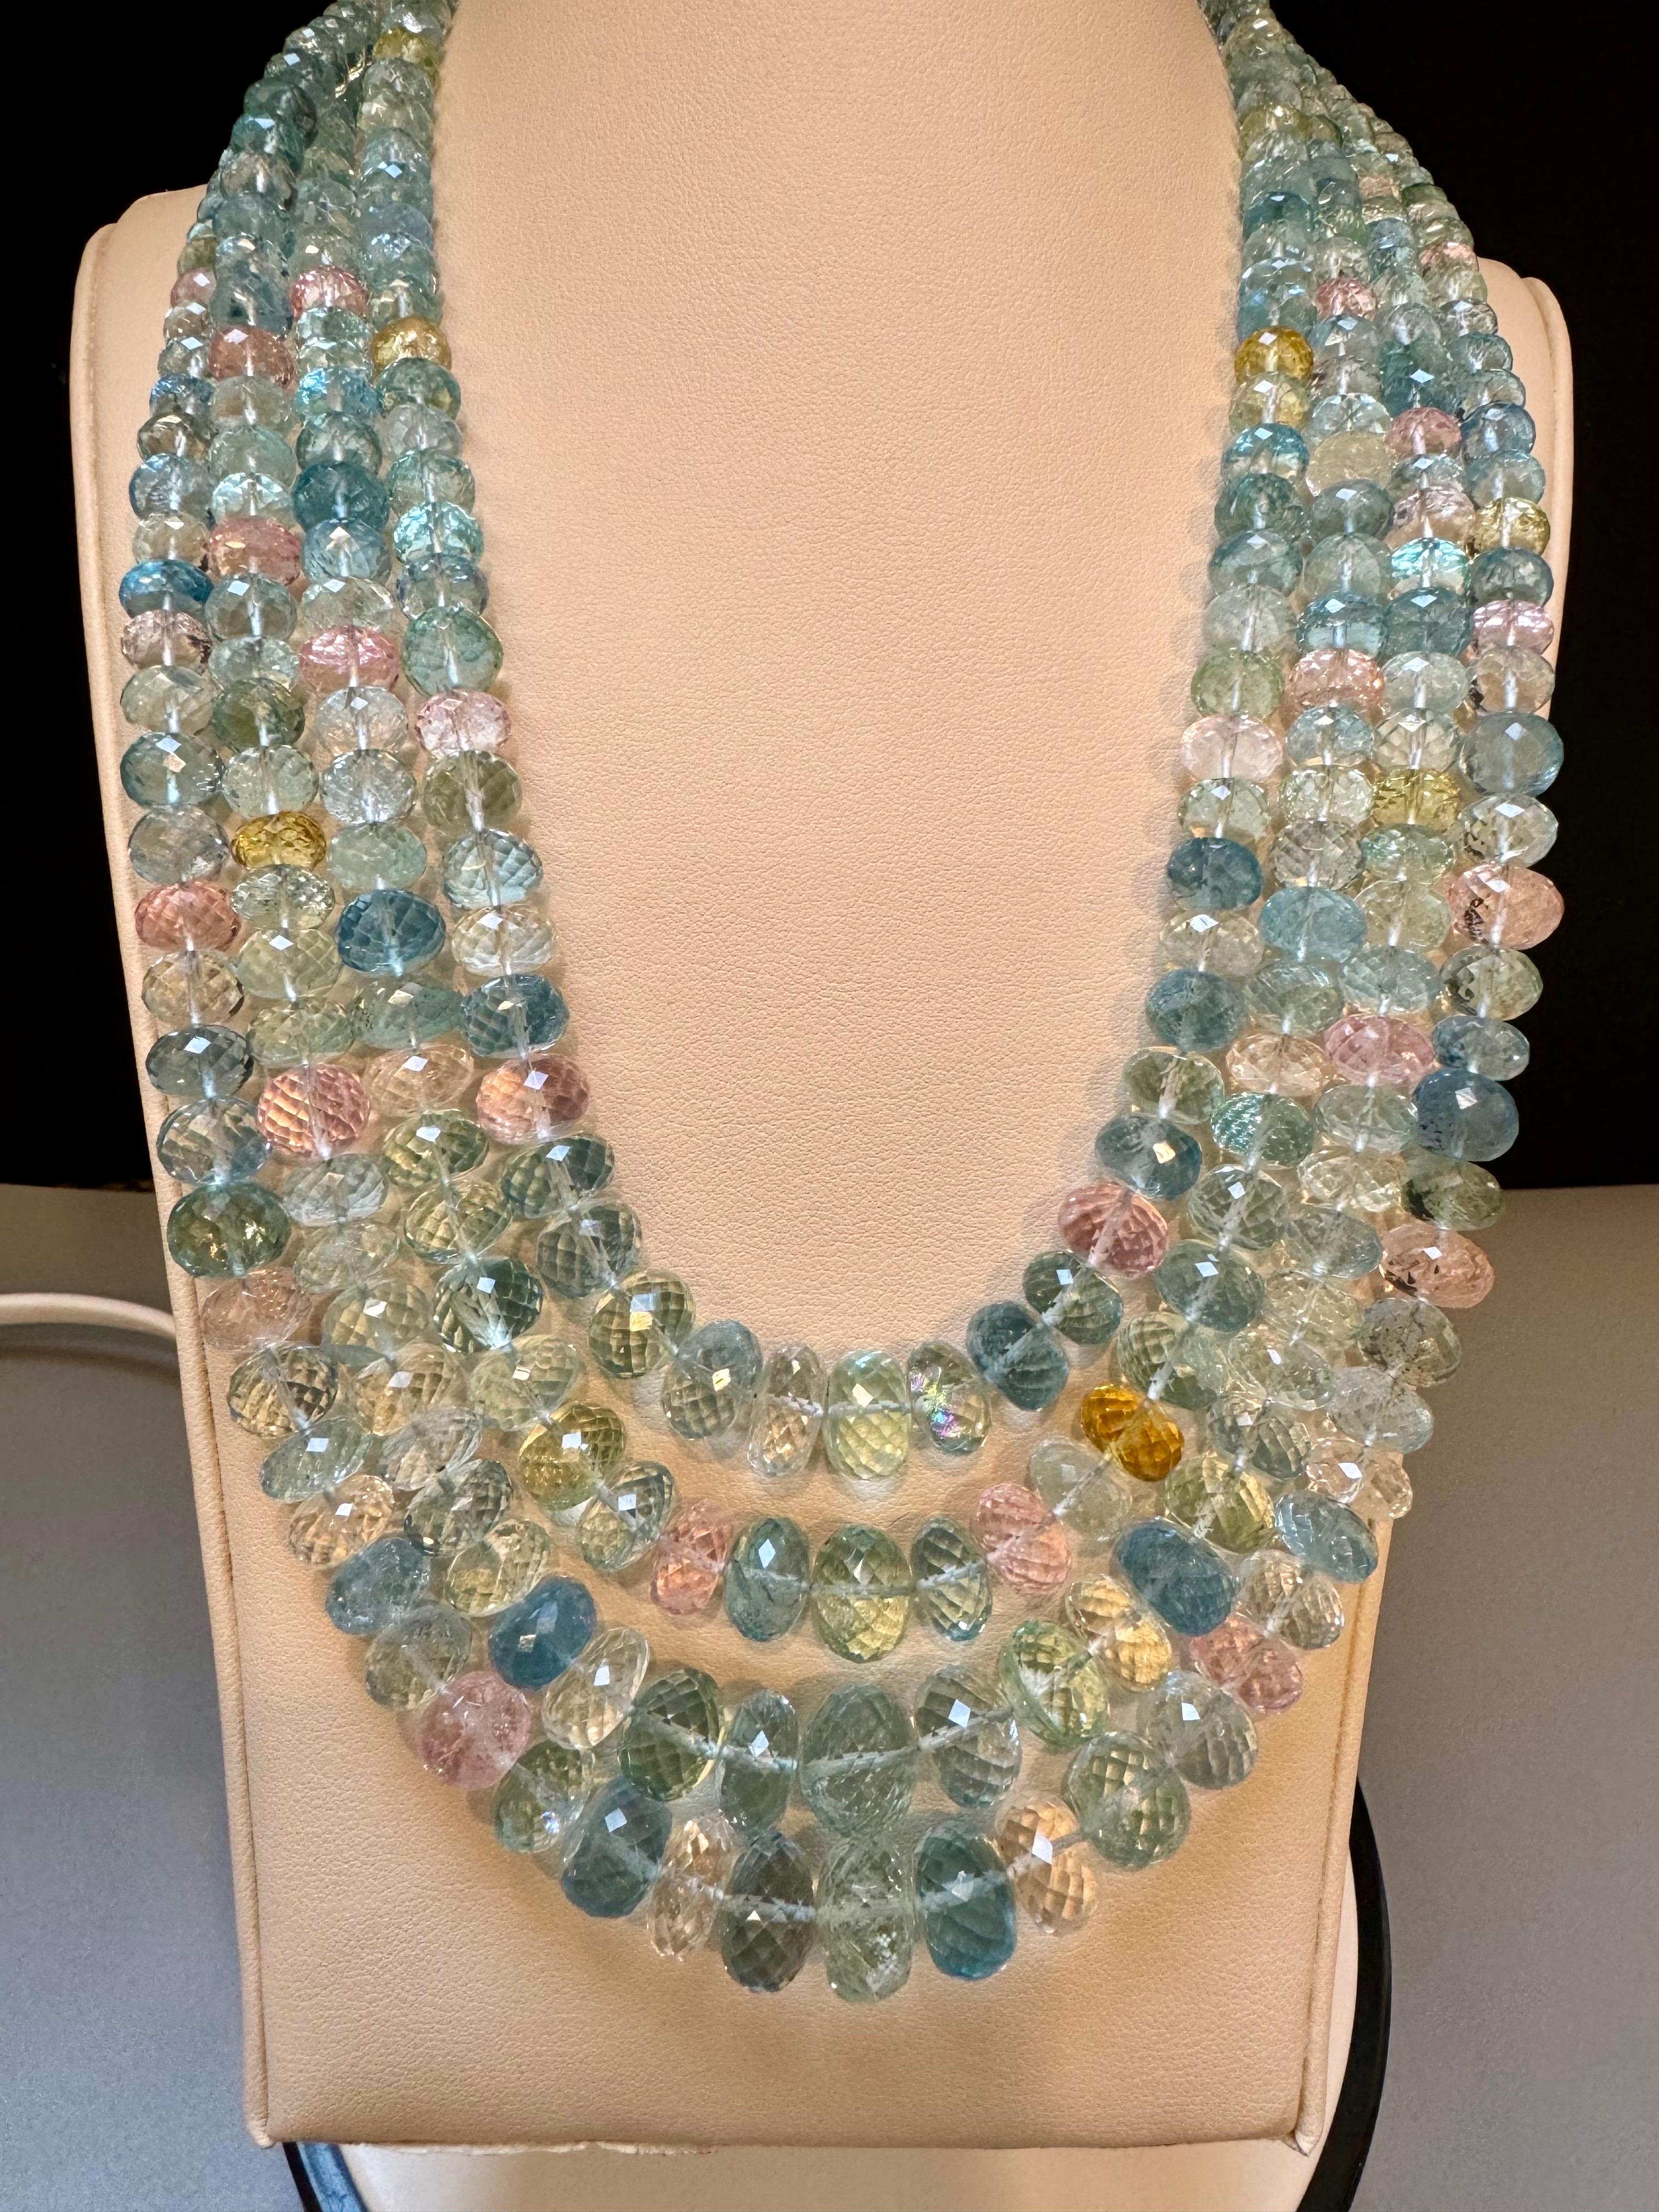 1000 Carat Natural Fine  Aquamarine Graduating Bead Necklace, Four Strand in Metal Clasp
Natural Multi color Aquamarine Round Beads in graduating size
Necklace has 4 strand
Approximately 4  mm to 8mm  bead
Clasp is not gold 
20 Inches long
Faceted